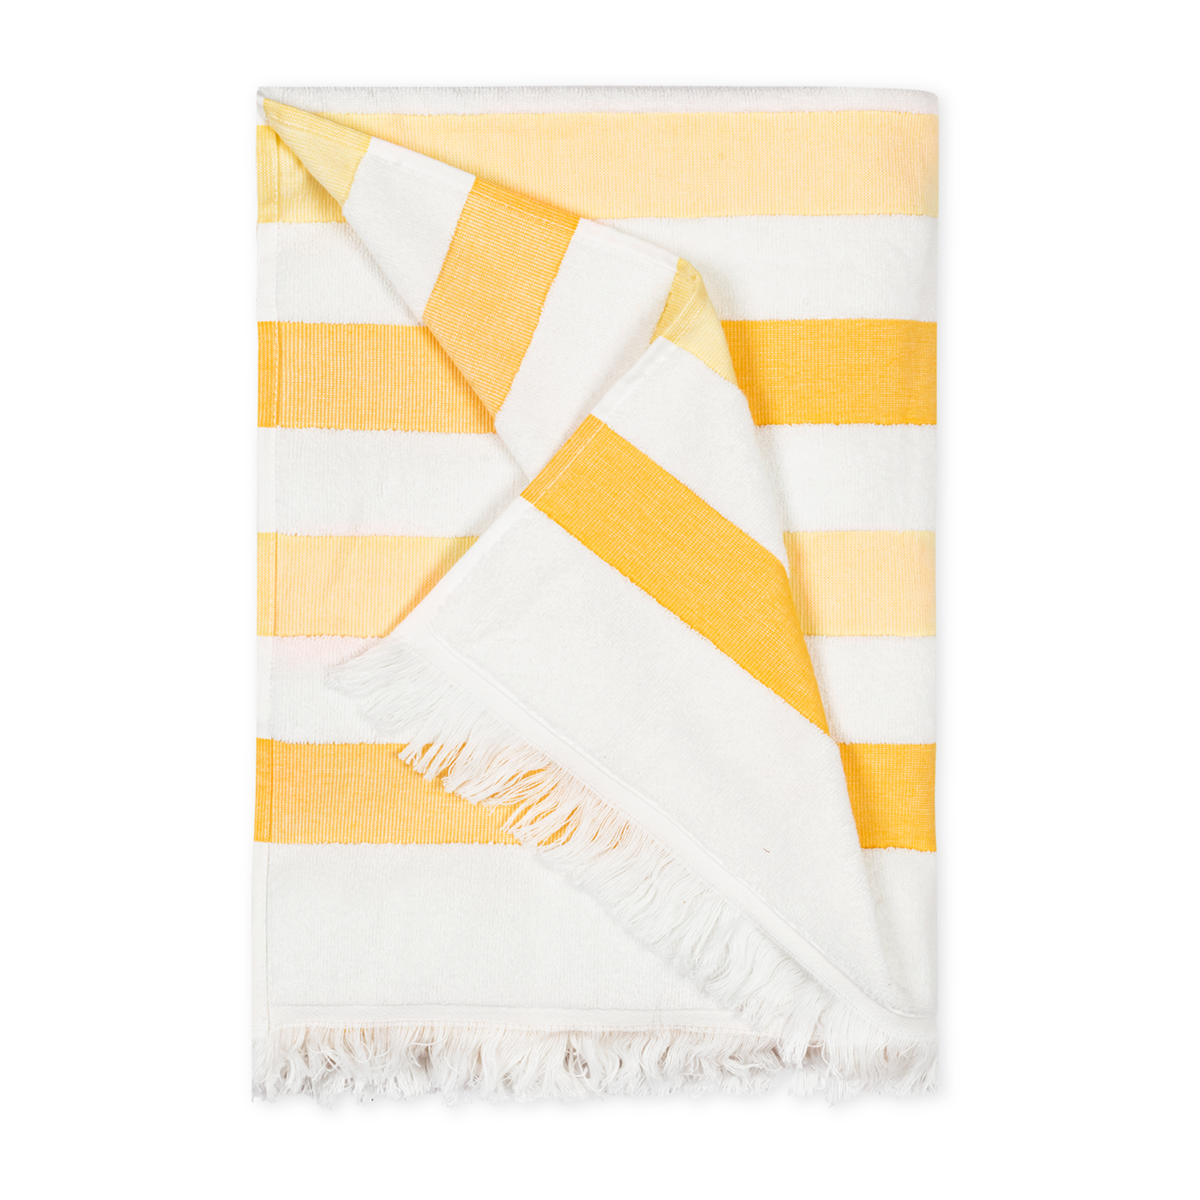 Folded Matouk Amado Pool and Beach Towels in Canary Stripe Color